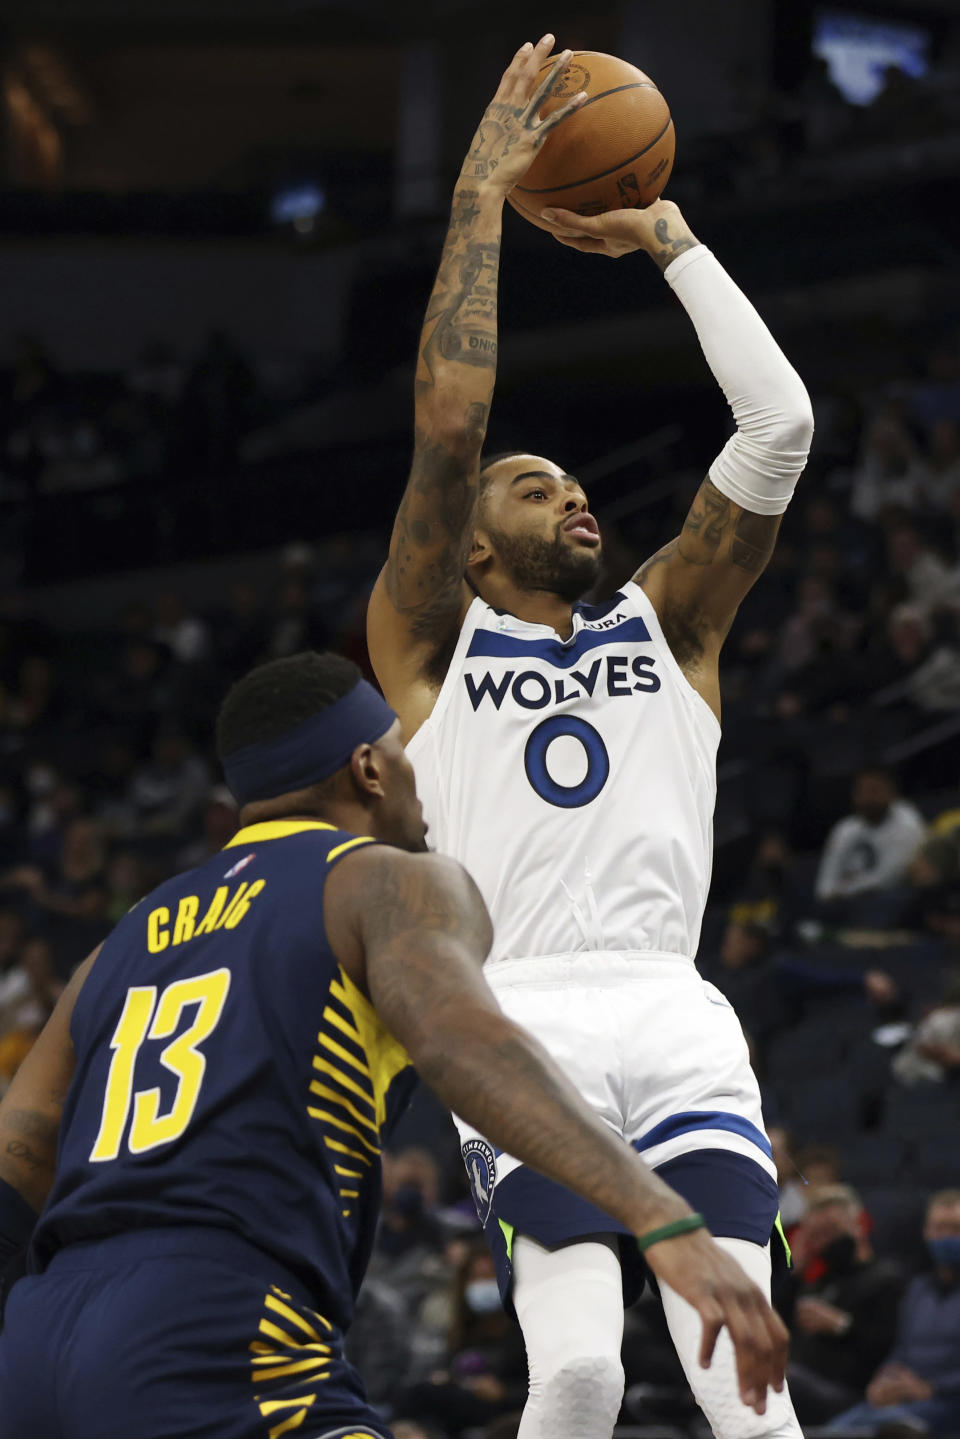 Minnesota Timberwolves guard D'Angelo Russell (0) shoots the ball against Indiana Pacers forward Torrey Craig (13) during the first half of an NBA basketball game Monday, Nov. 29, 2021, in Minneapolis. (AP Photo/Stacy Bengs)